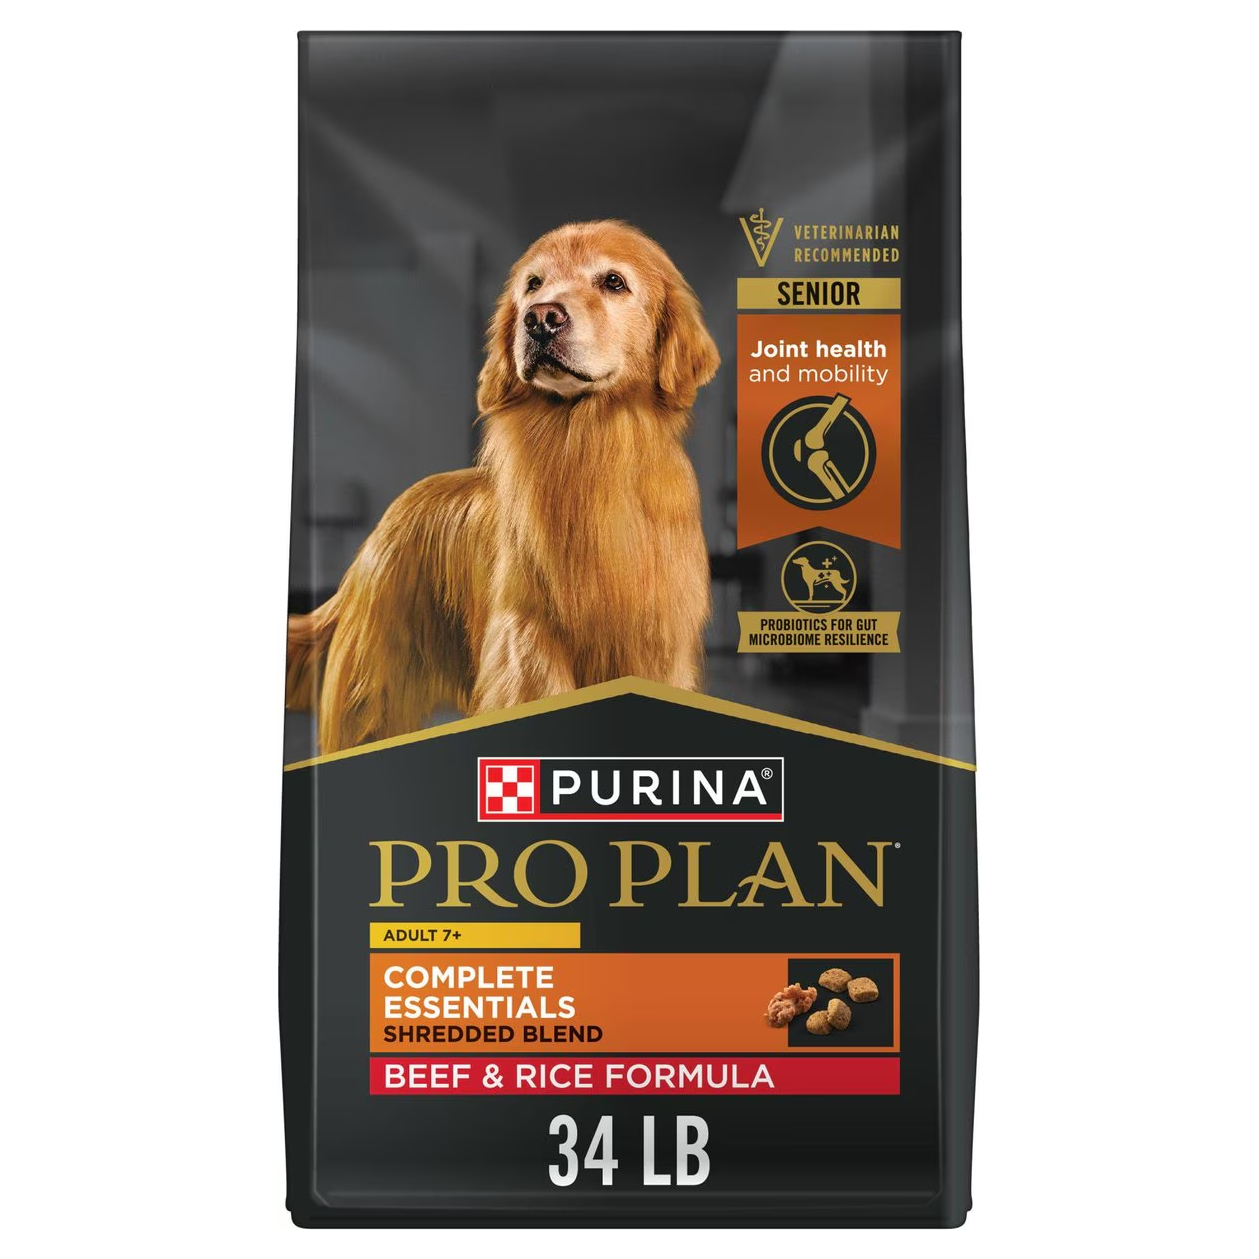 Purina Pro Plan Shredded Blend Beef & Rice